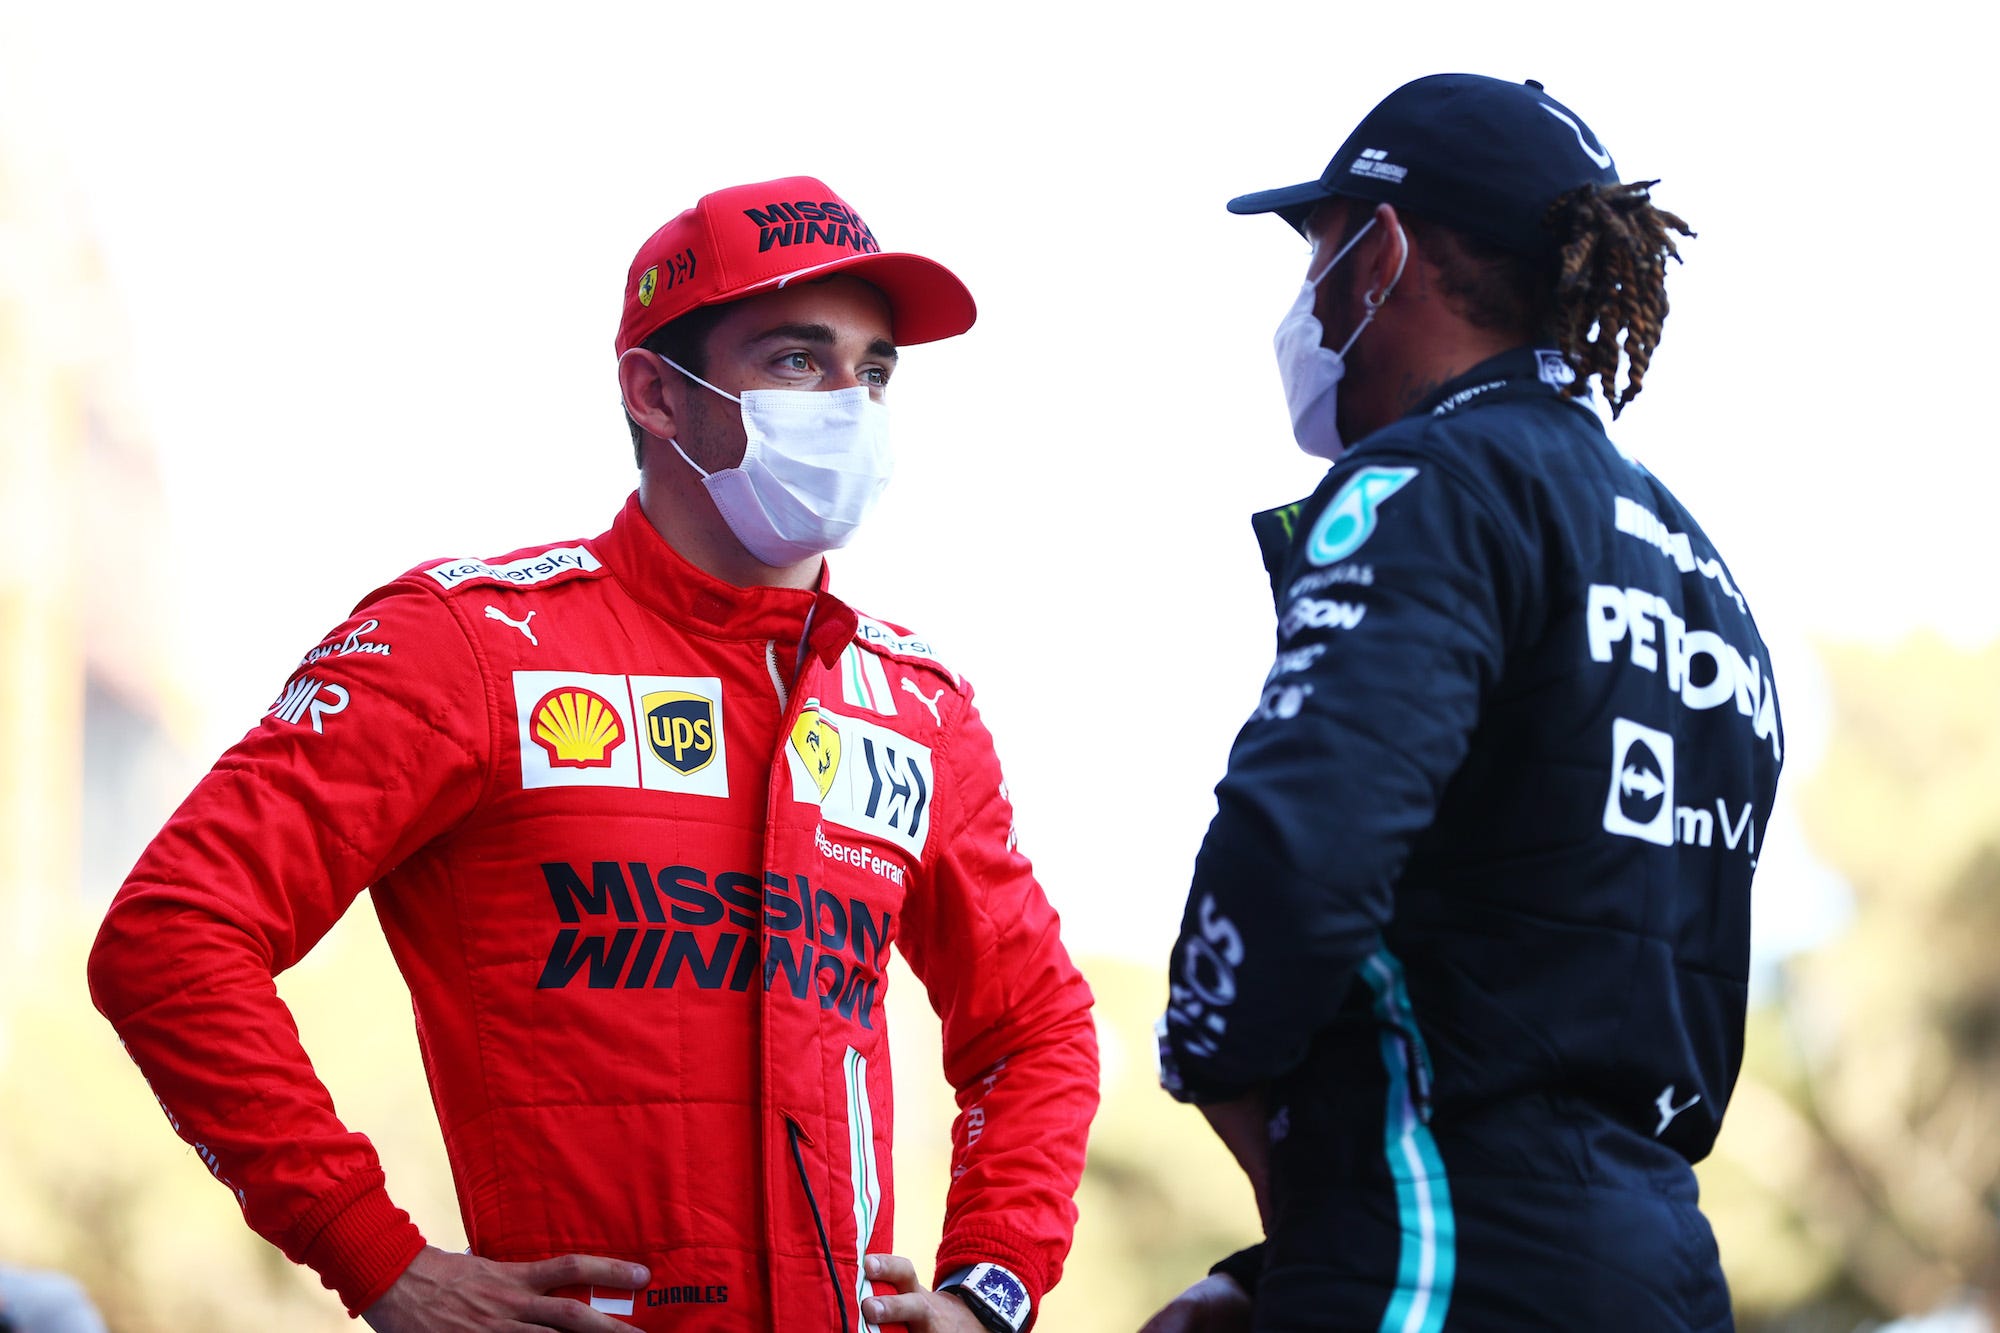 Pole position qualifier Charles Leclerc of Monaco and Ferrari talks with second place qualifier Lewis Hamilton of Great Britain and Mercedes GP in parc ferme during qualifying ahead of the F1 Grand Prix of Azerbaijan at Baku City Circuit on June 05, 2021 in Baku, Azerbaijan.